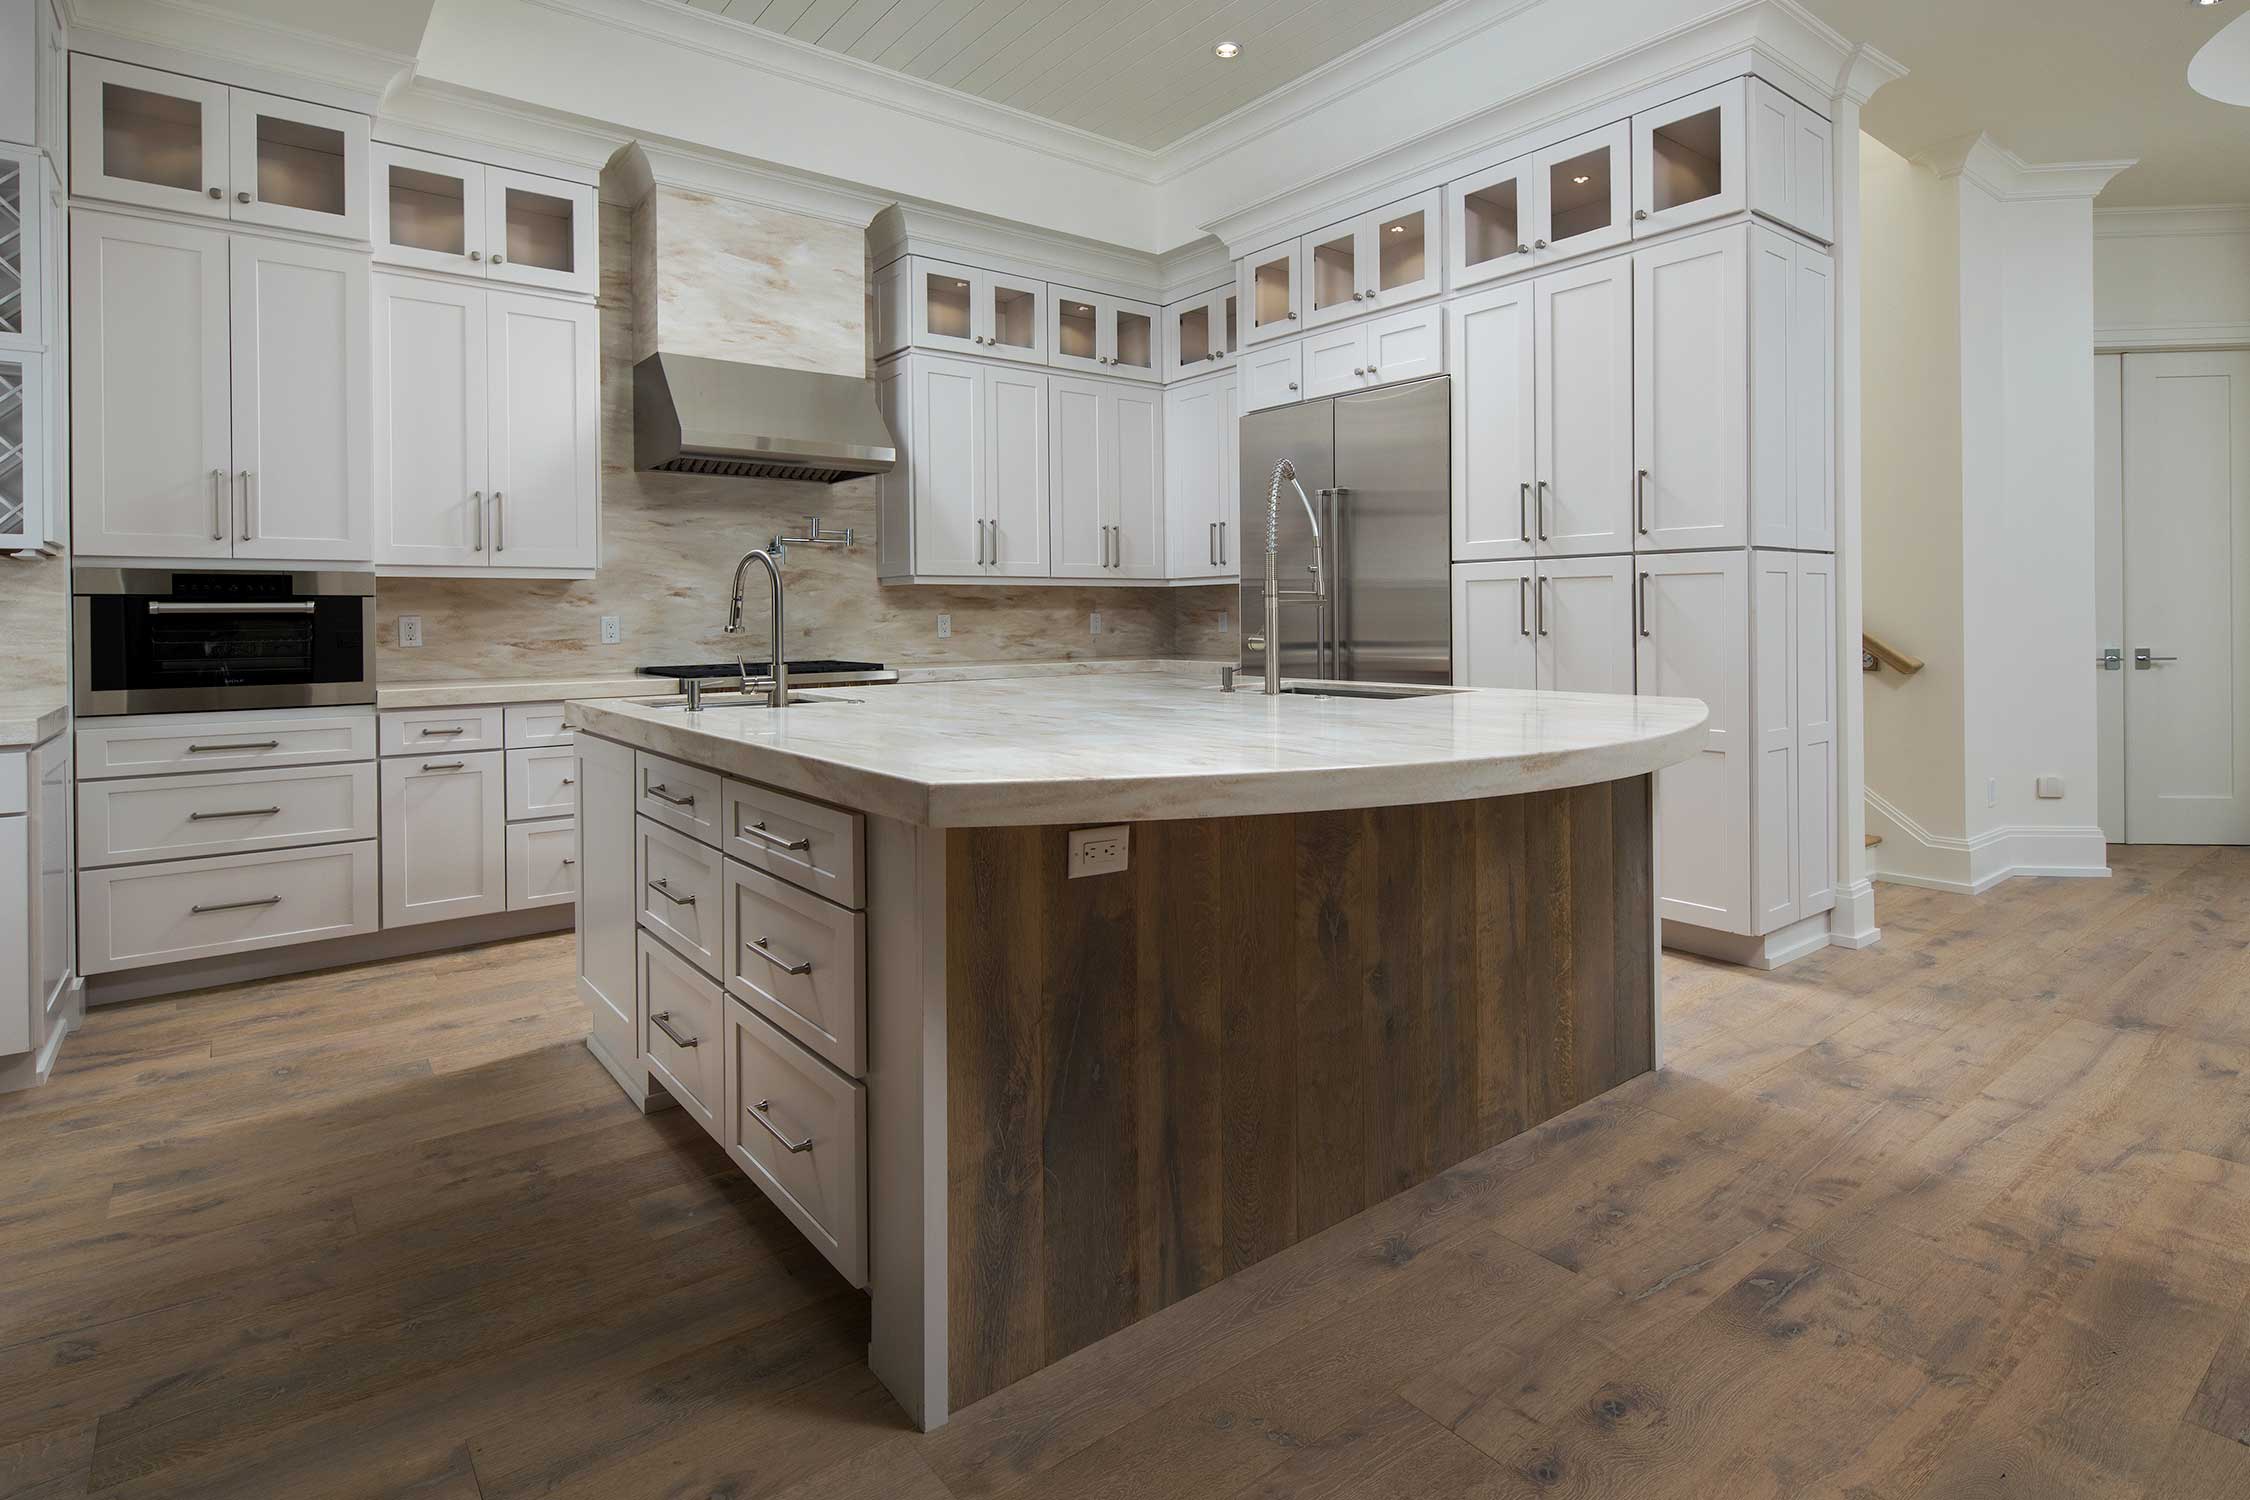 Kitchen Cabinetry Naples, Florida Custom Home - Kraftmaid Cabinetry Sales and Installation